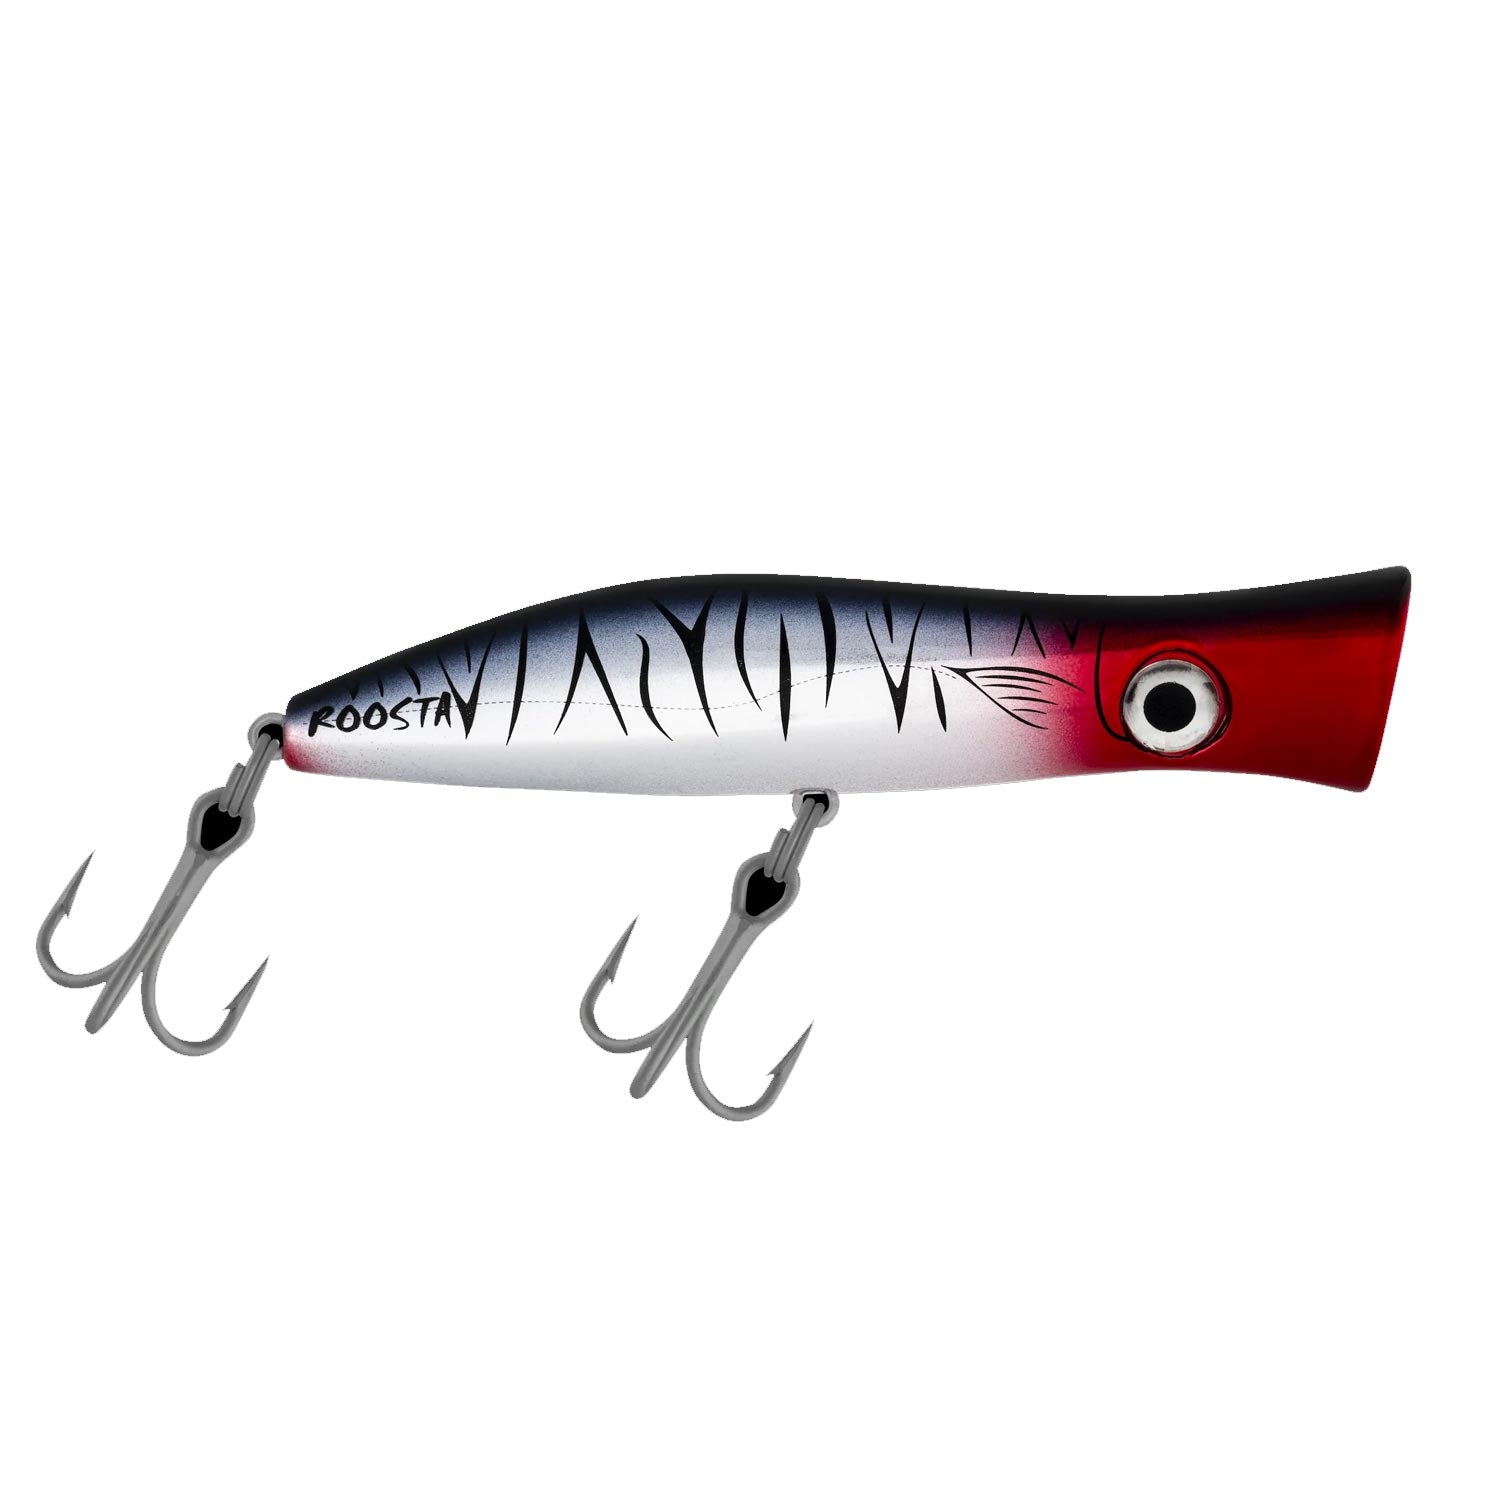 Halco Roosta Popper 135 Surface Lure - Rok Max